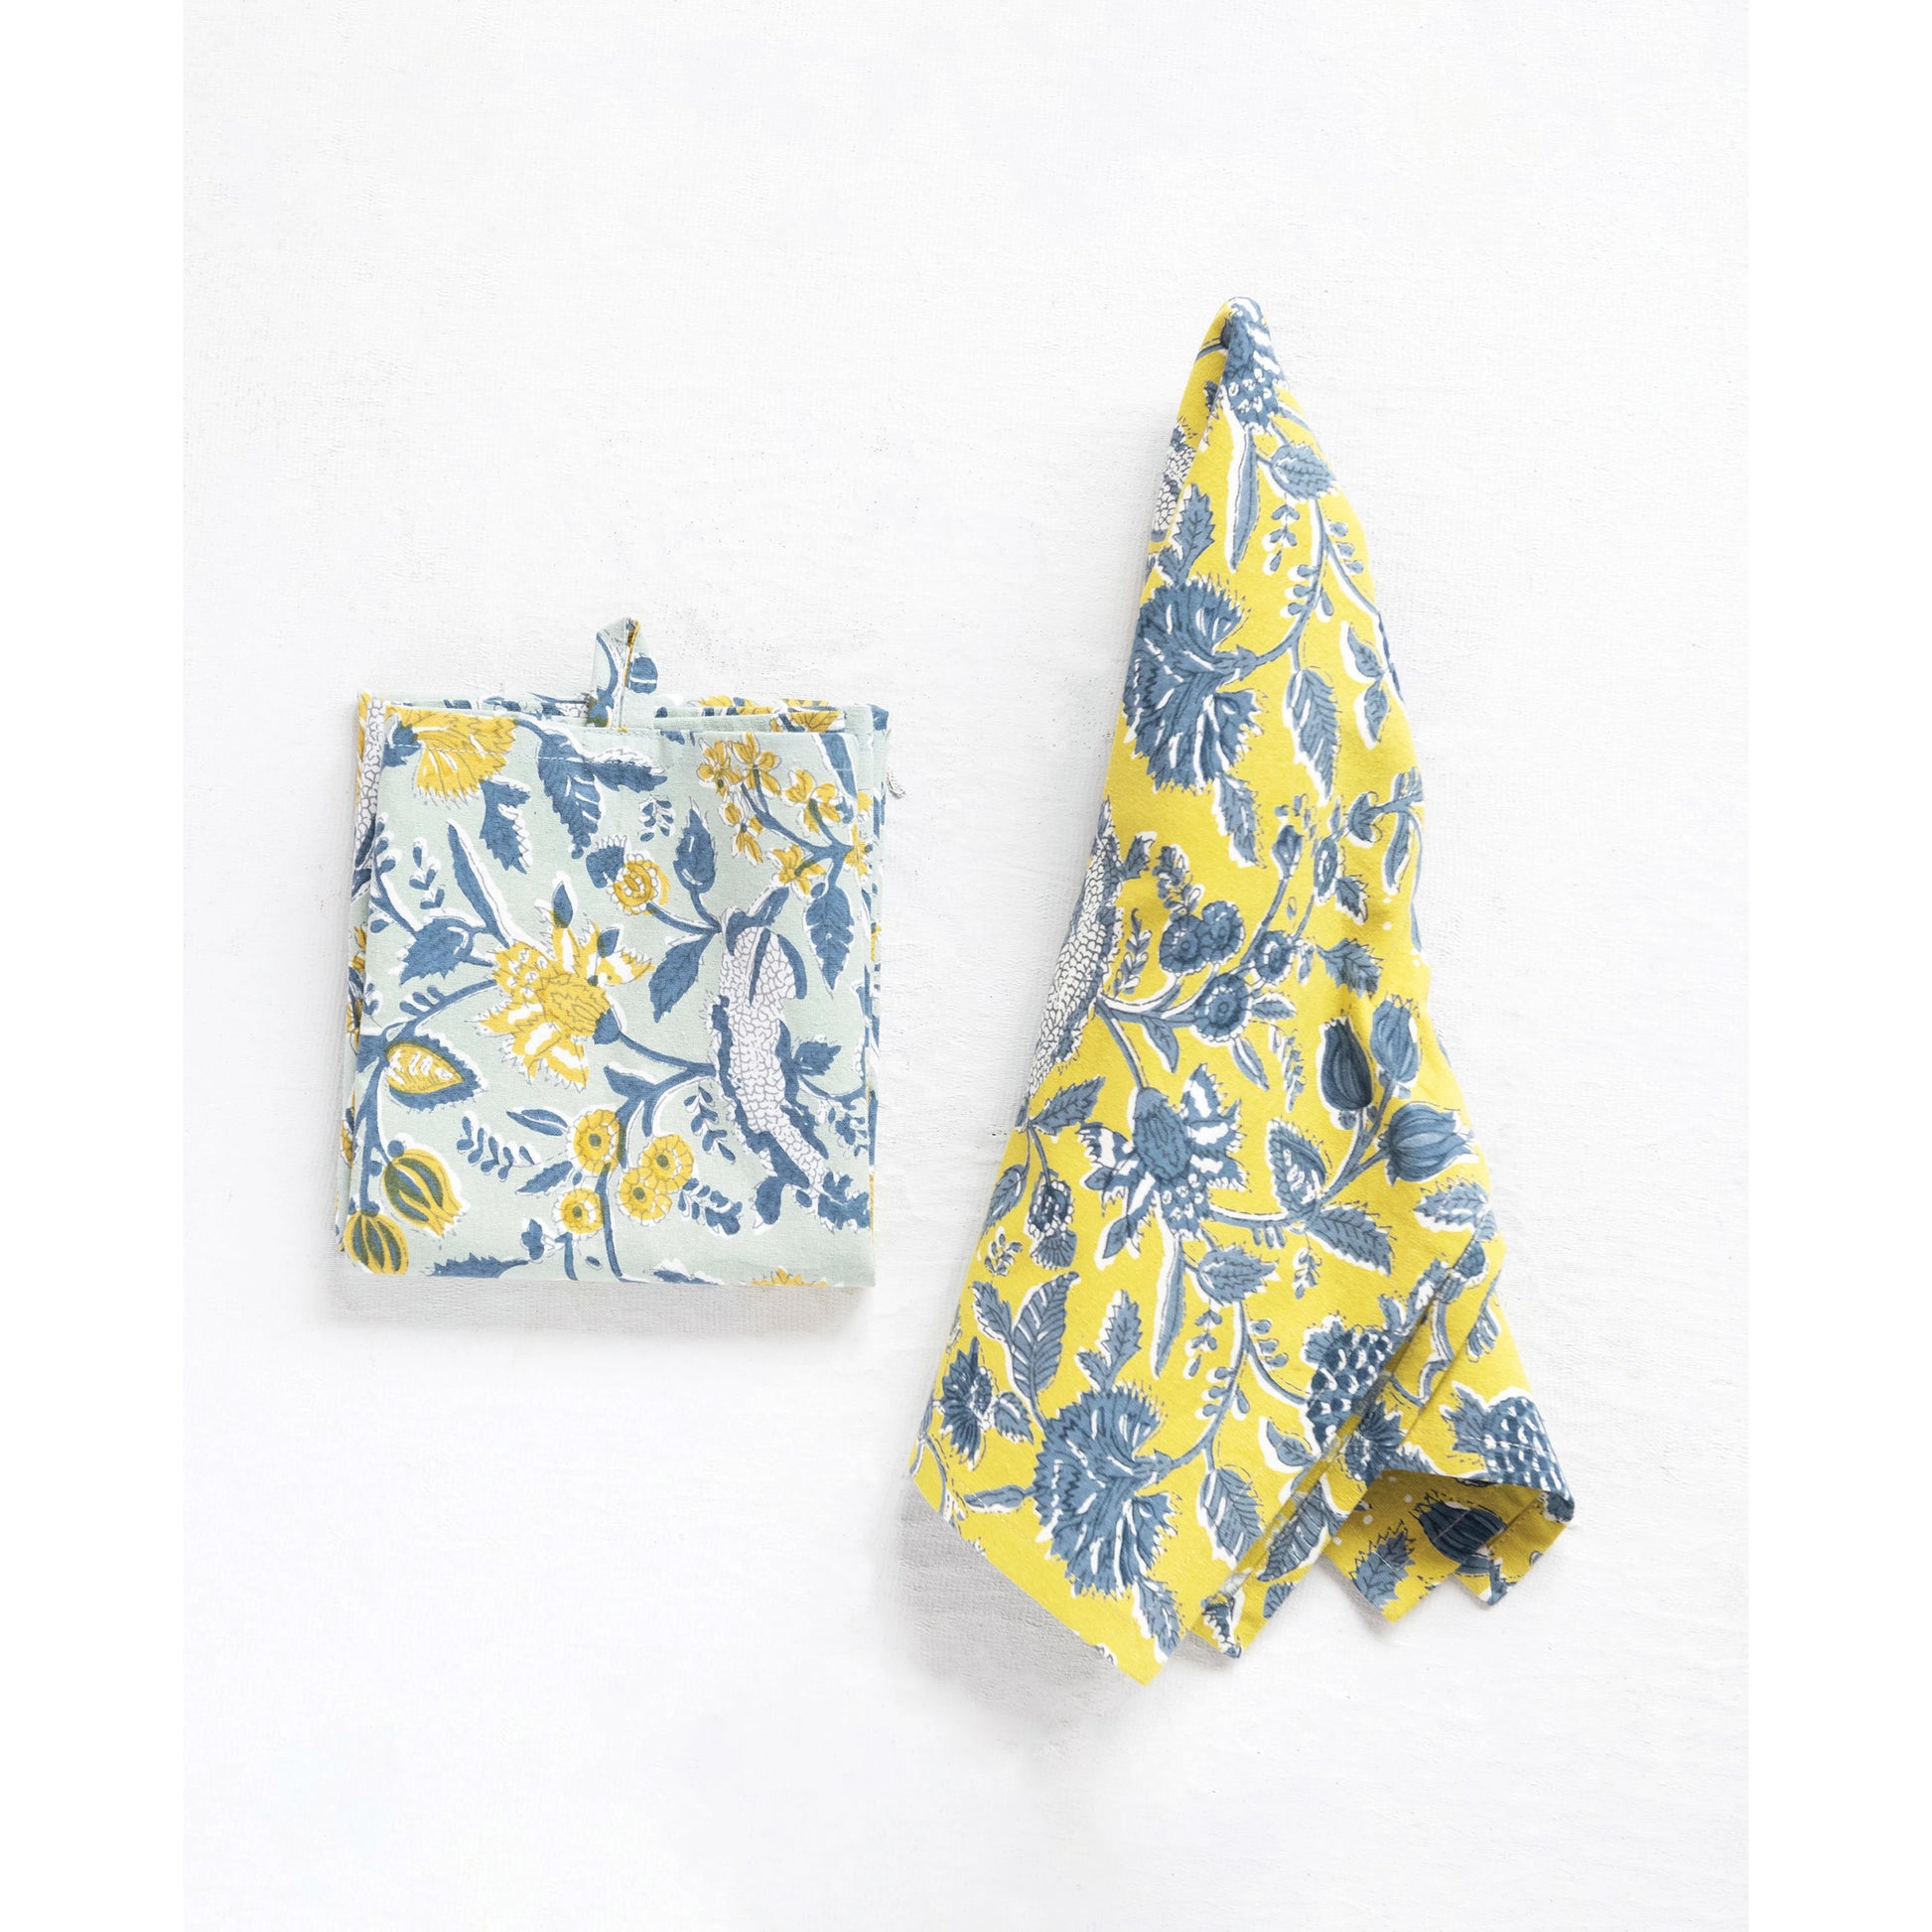 a folded blue and one yellow cotton tea towels with floral patterns hanging on a white background